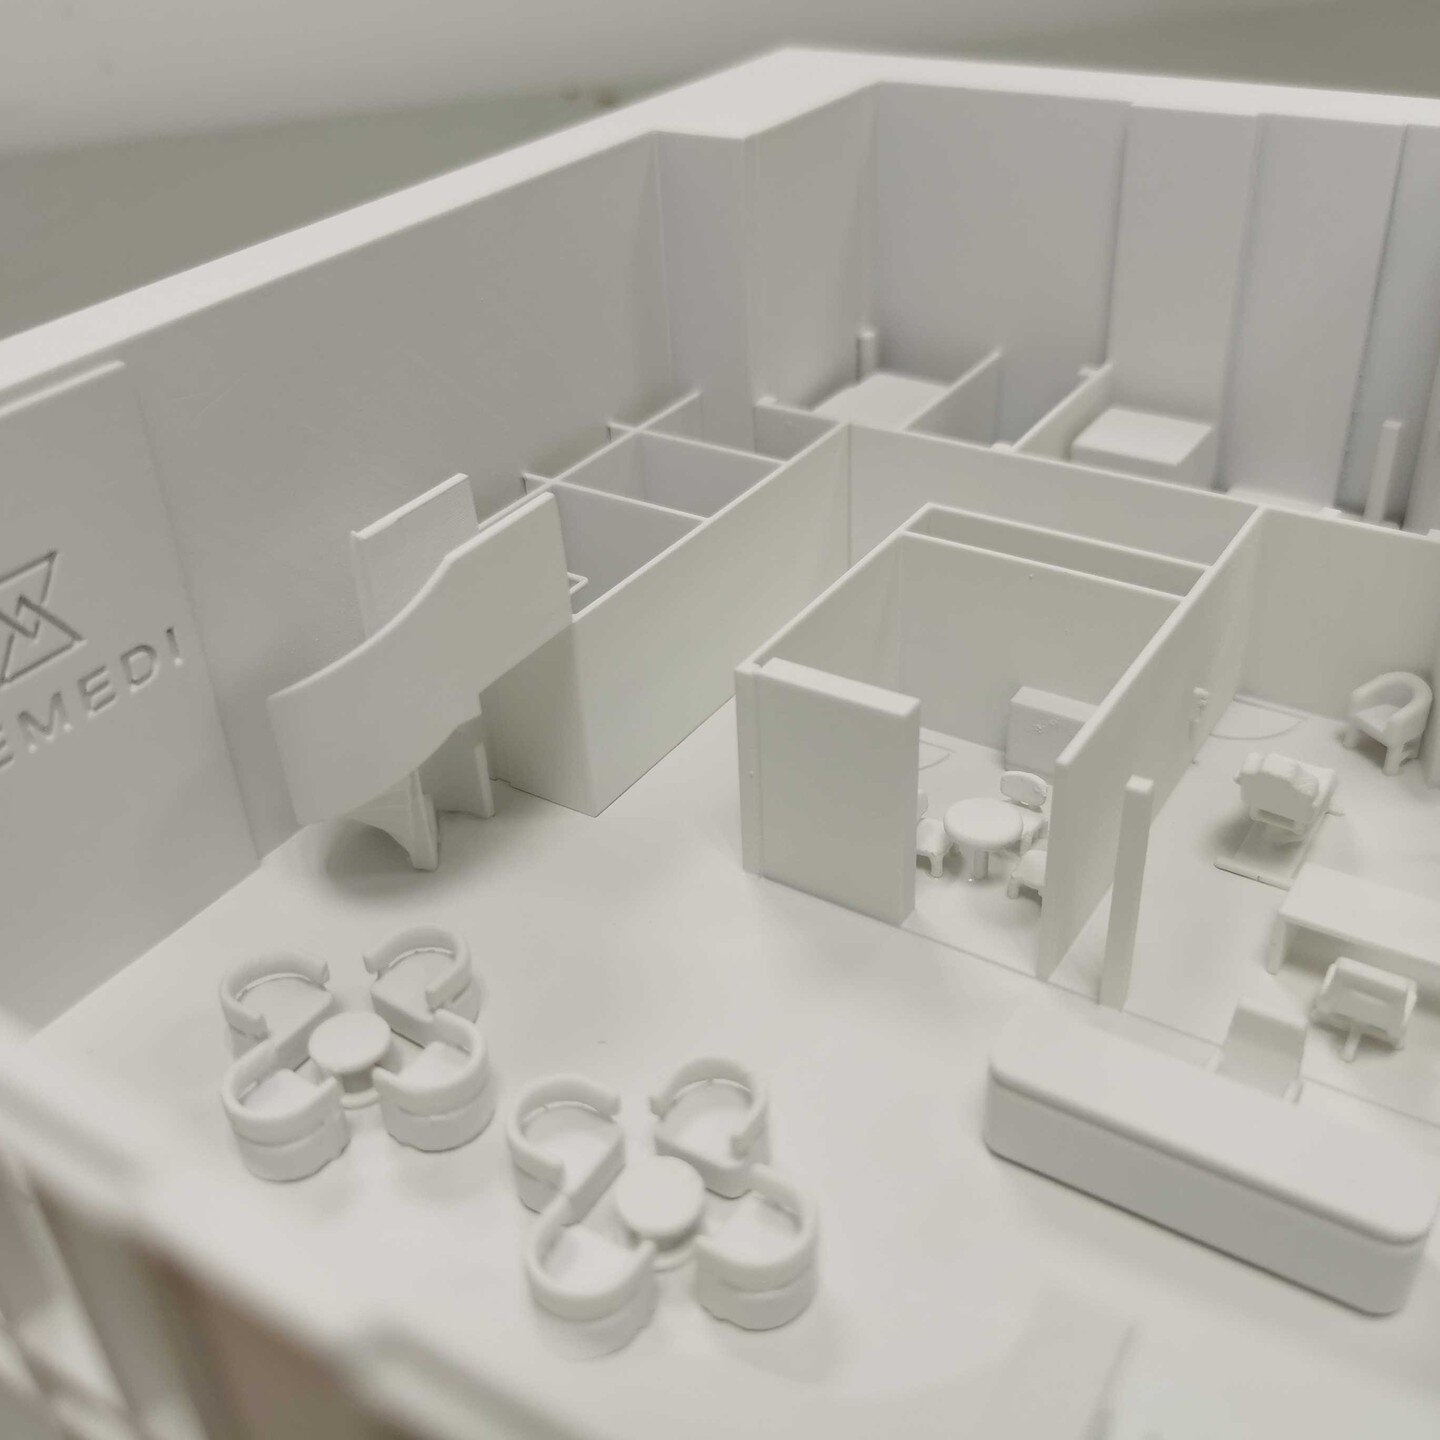 A great example of how #3dprinting helps KB ARCHITECTS LTD demonstrate fit out and scale to their client Remedi Clinic. Thank you for using Fixie for your project! 💚

https://lnkd.in/dJBBWFbe